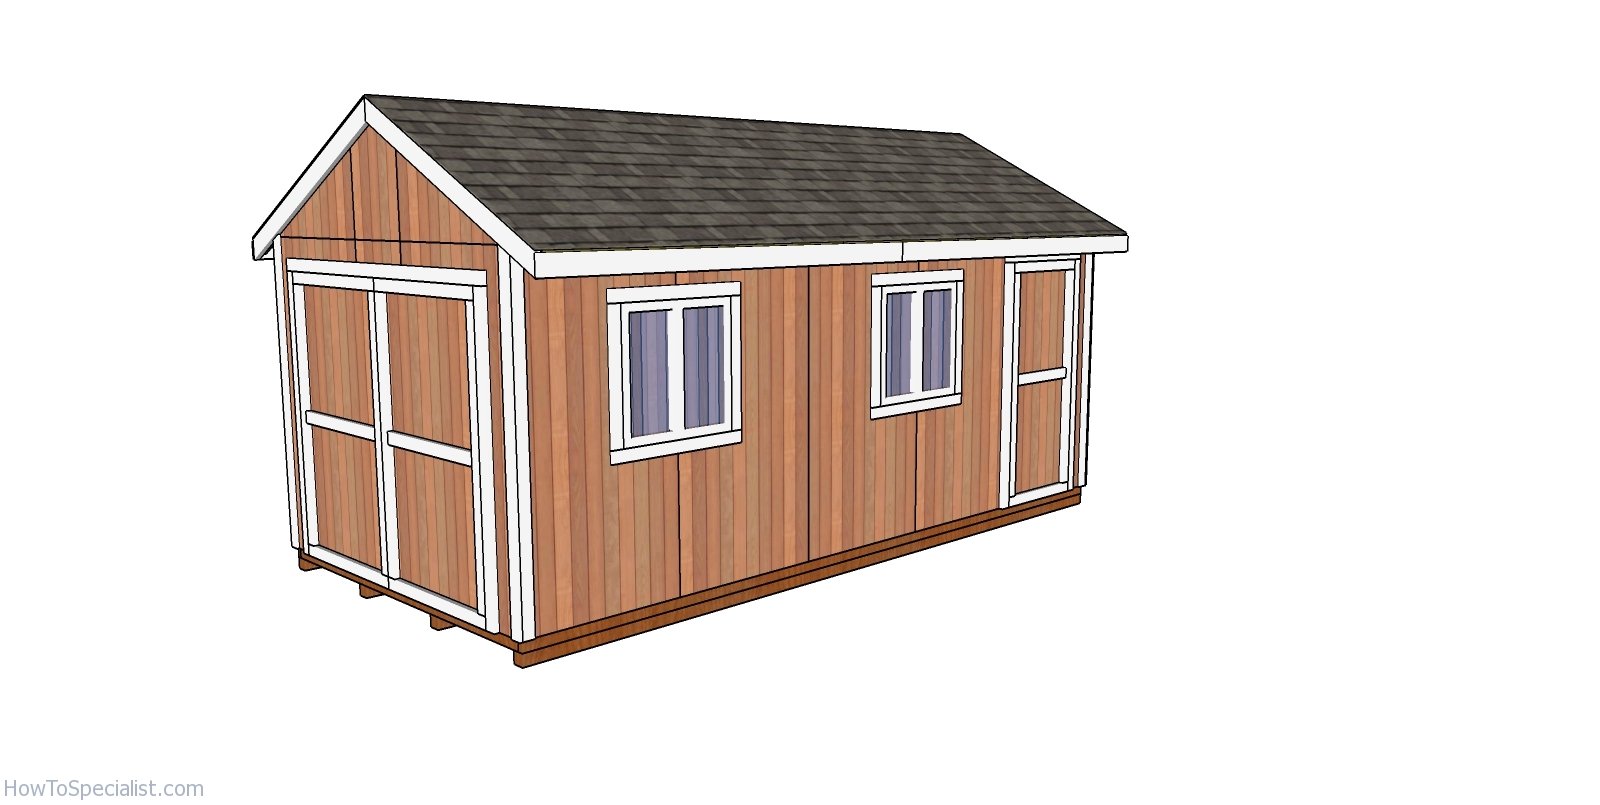 10×20 Gable Shed Plans | HowToSpecialist - How to Build, Step by Step ...